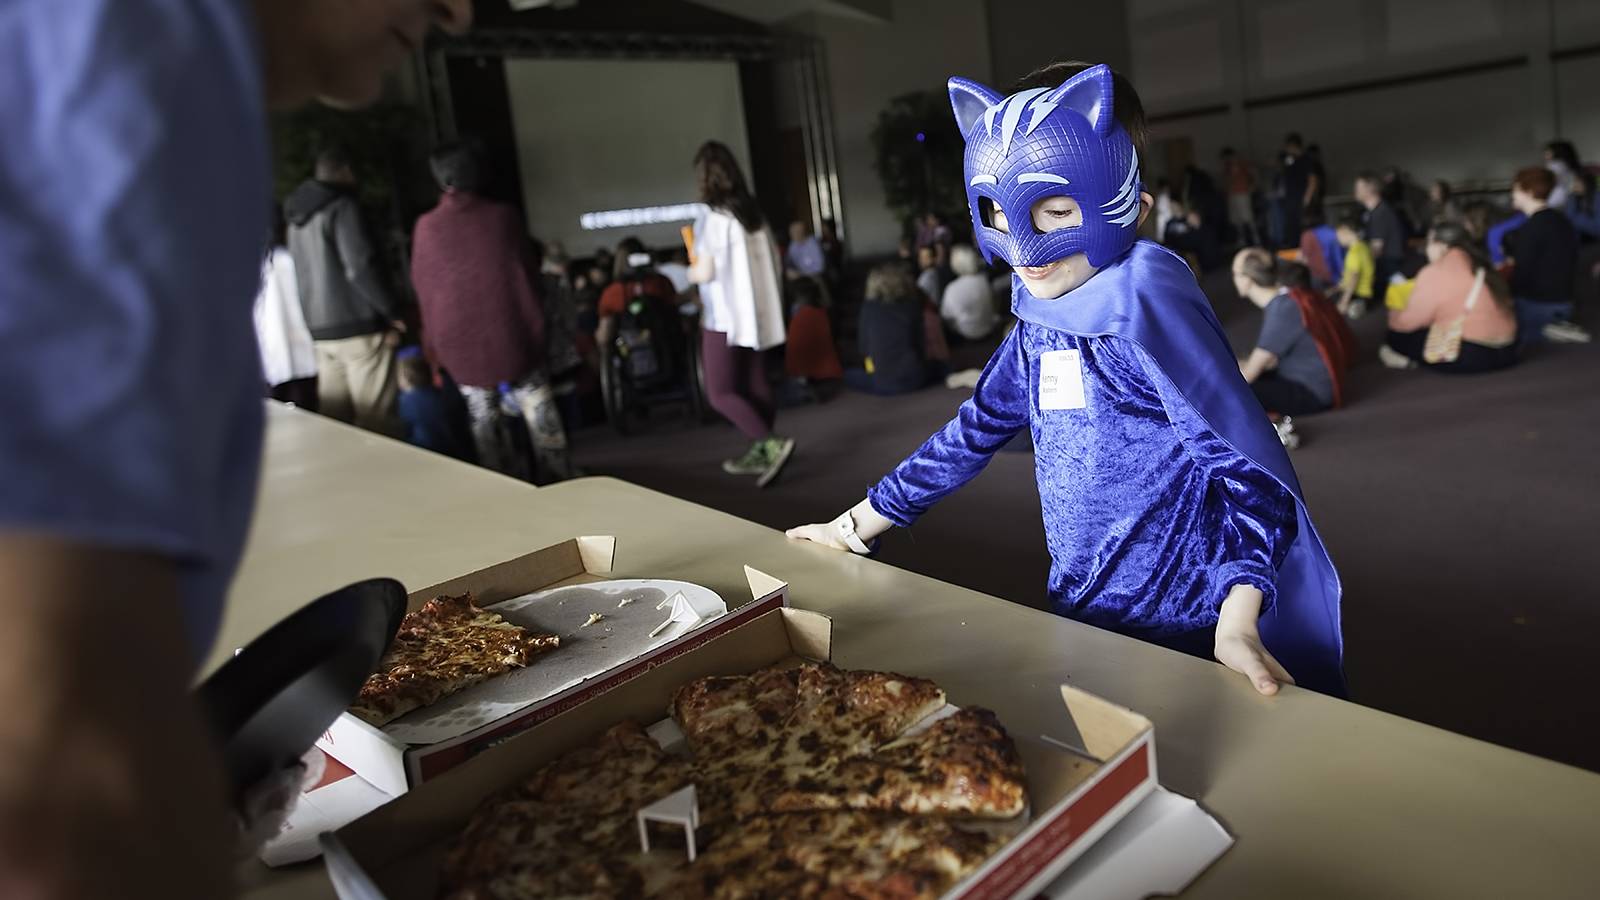 A child in a superhero costume selects pizza